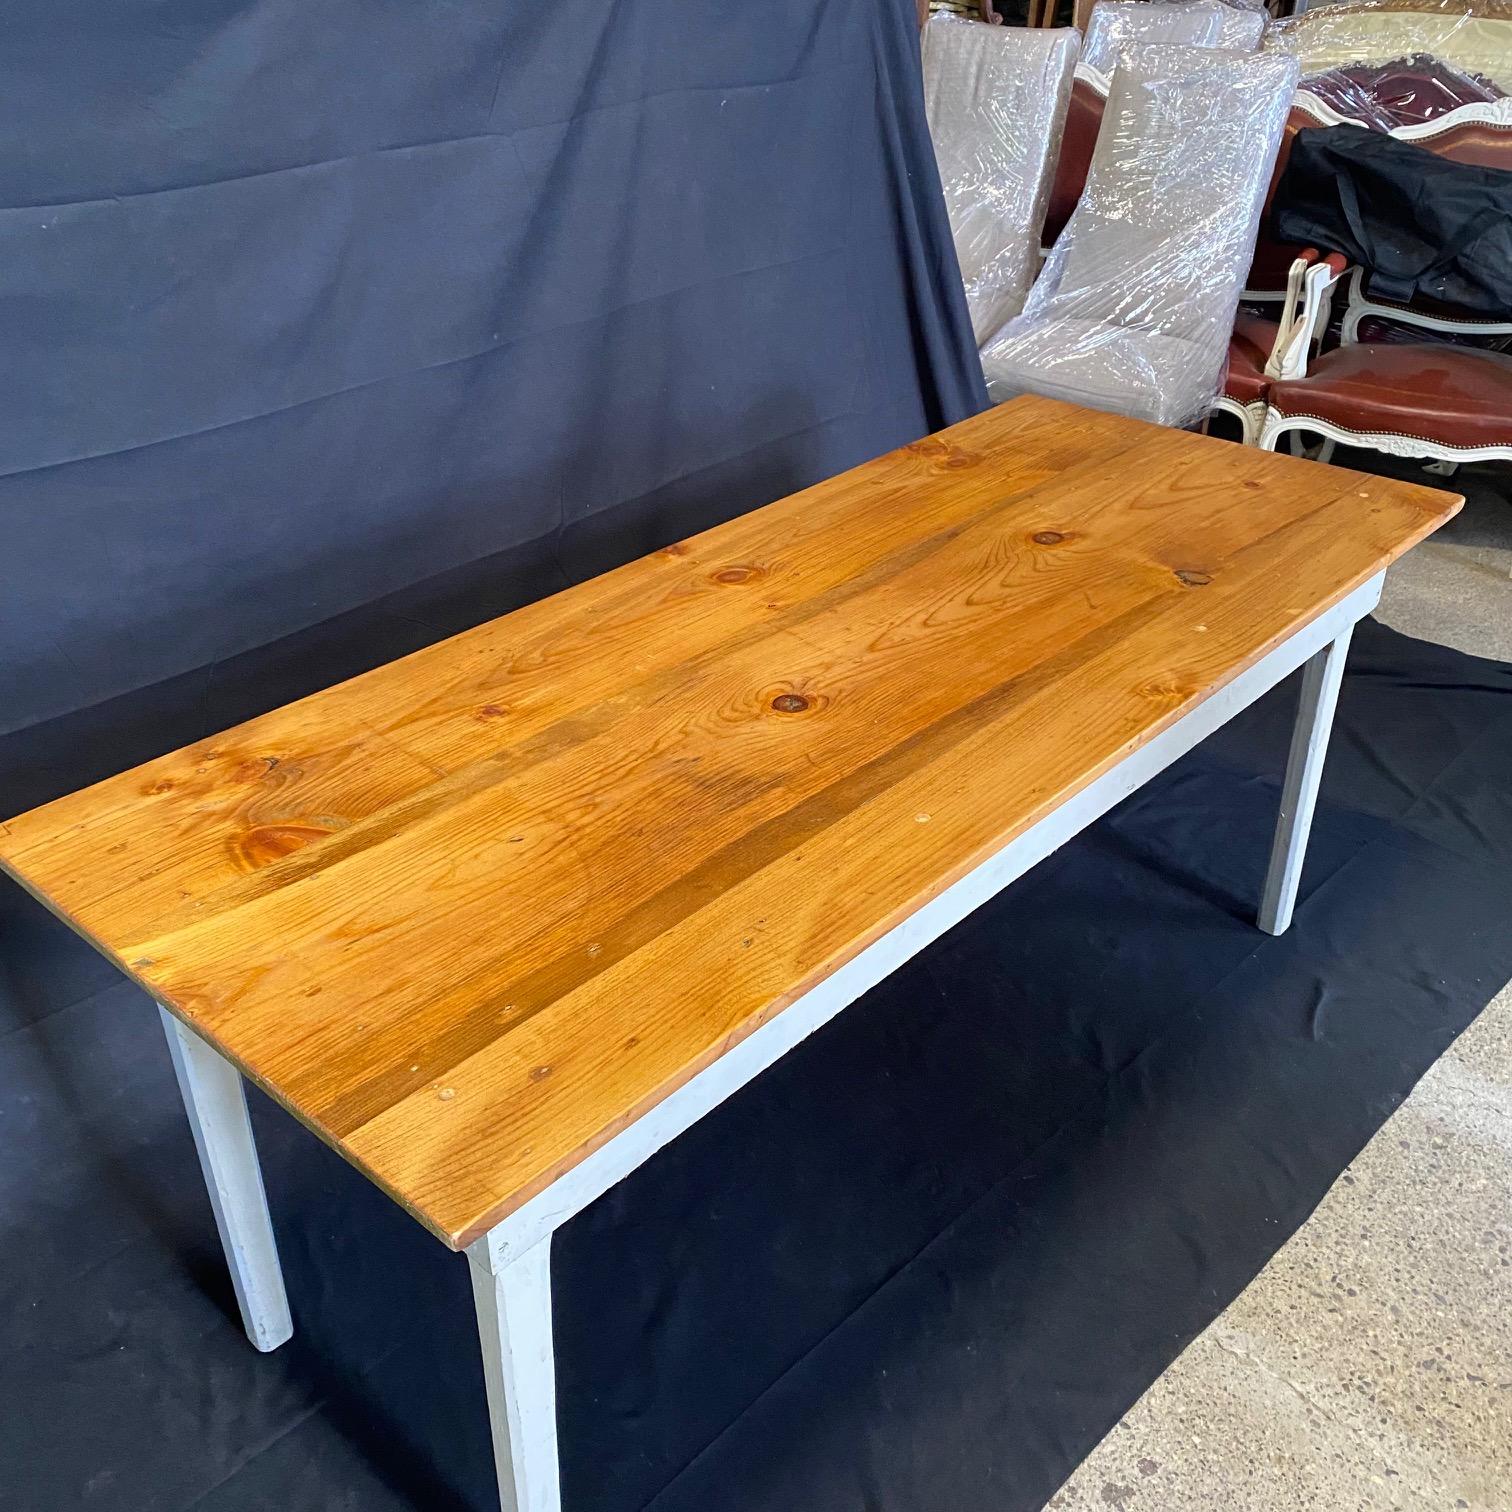 Classic primitive style dining table in the farmhouse style from an early Grange in Maine. Used since the 1800s to hold town meetings, it has been restored beautifully, yet retains its original paint on the body. All legs can be released and fold up